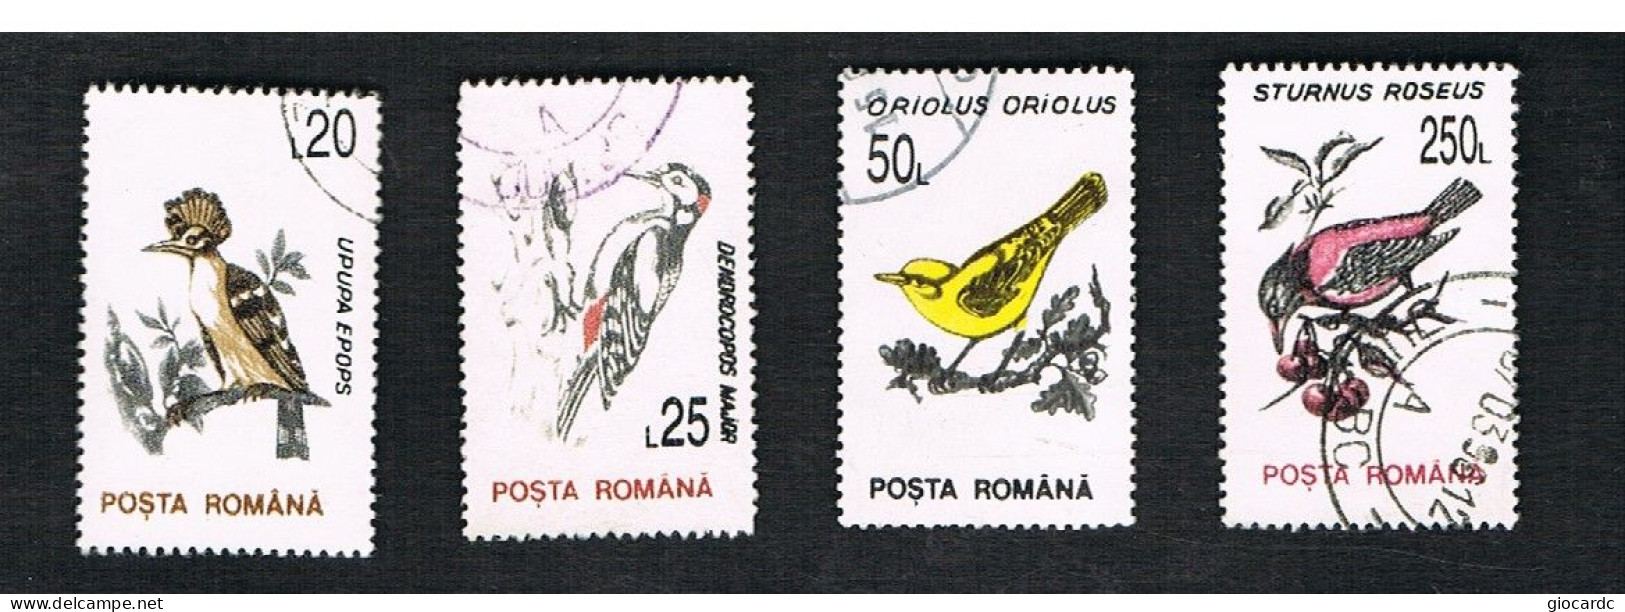 ROMANIA - SG 5510.5509  - 1993  CURRENT SERIE: BIRDS (4 STAMPS OF THE SET ON WHITE PAPER)  - USED ° - - Usado